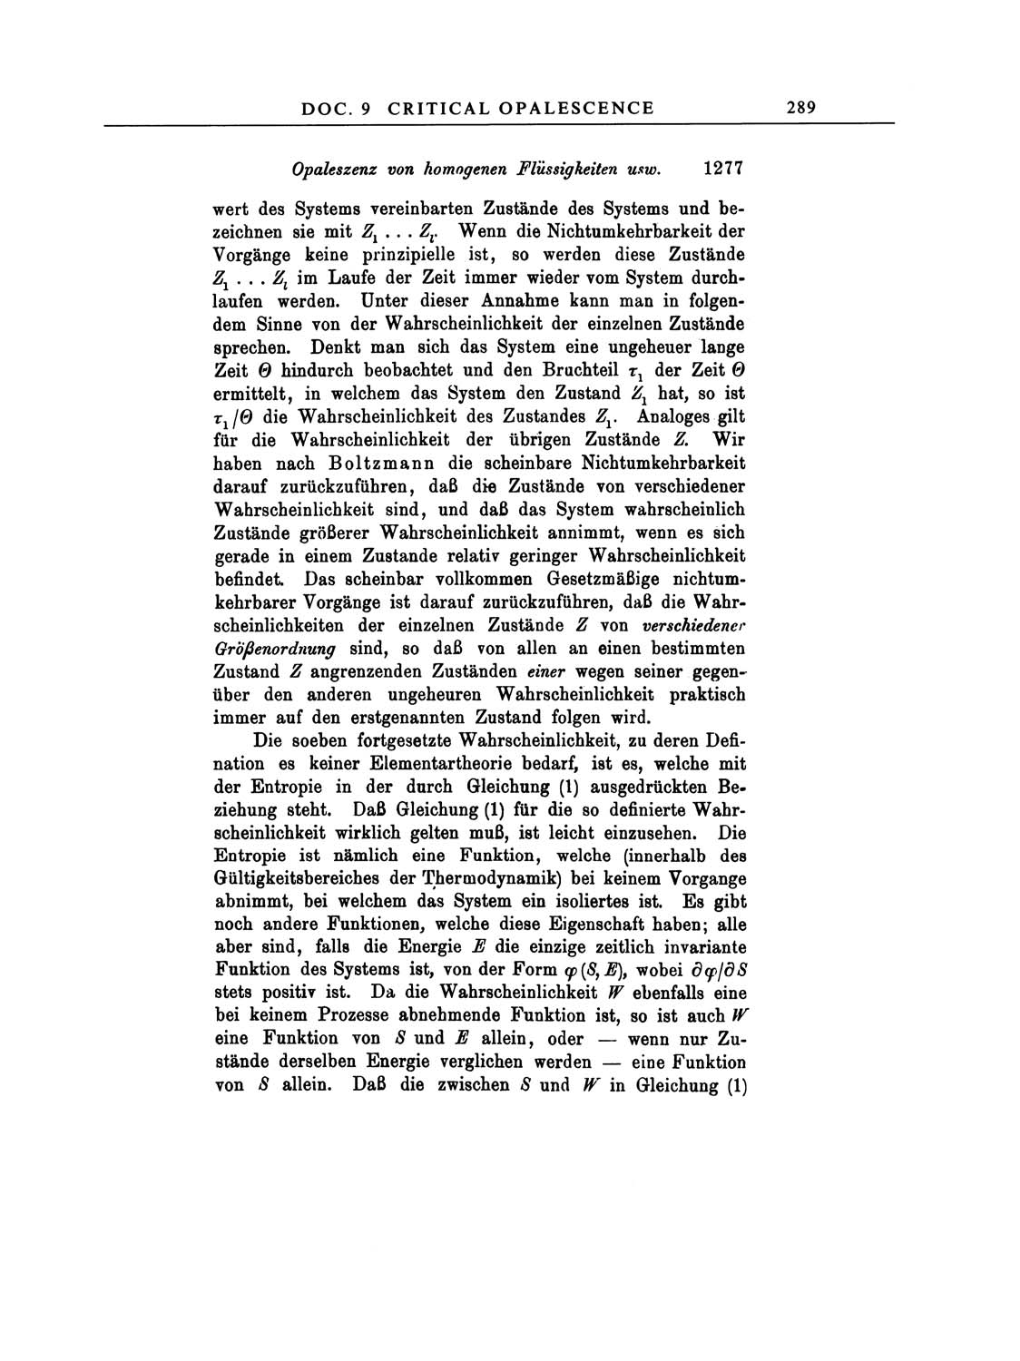 Volume 3: The Swiss Years: Writings 1909-1911 page 289